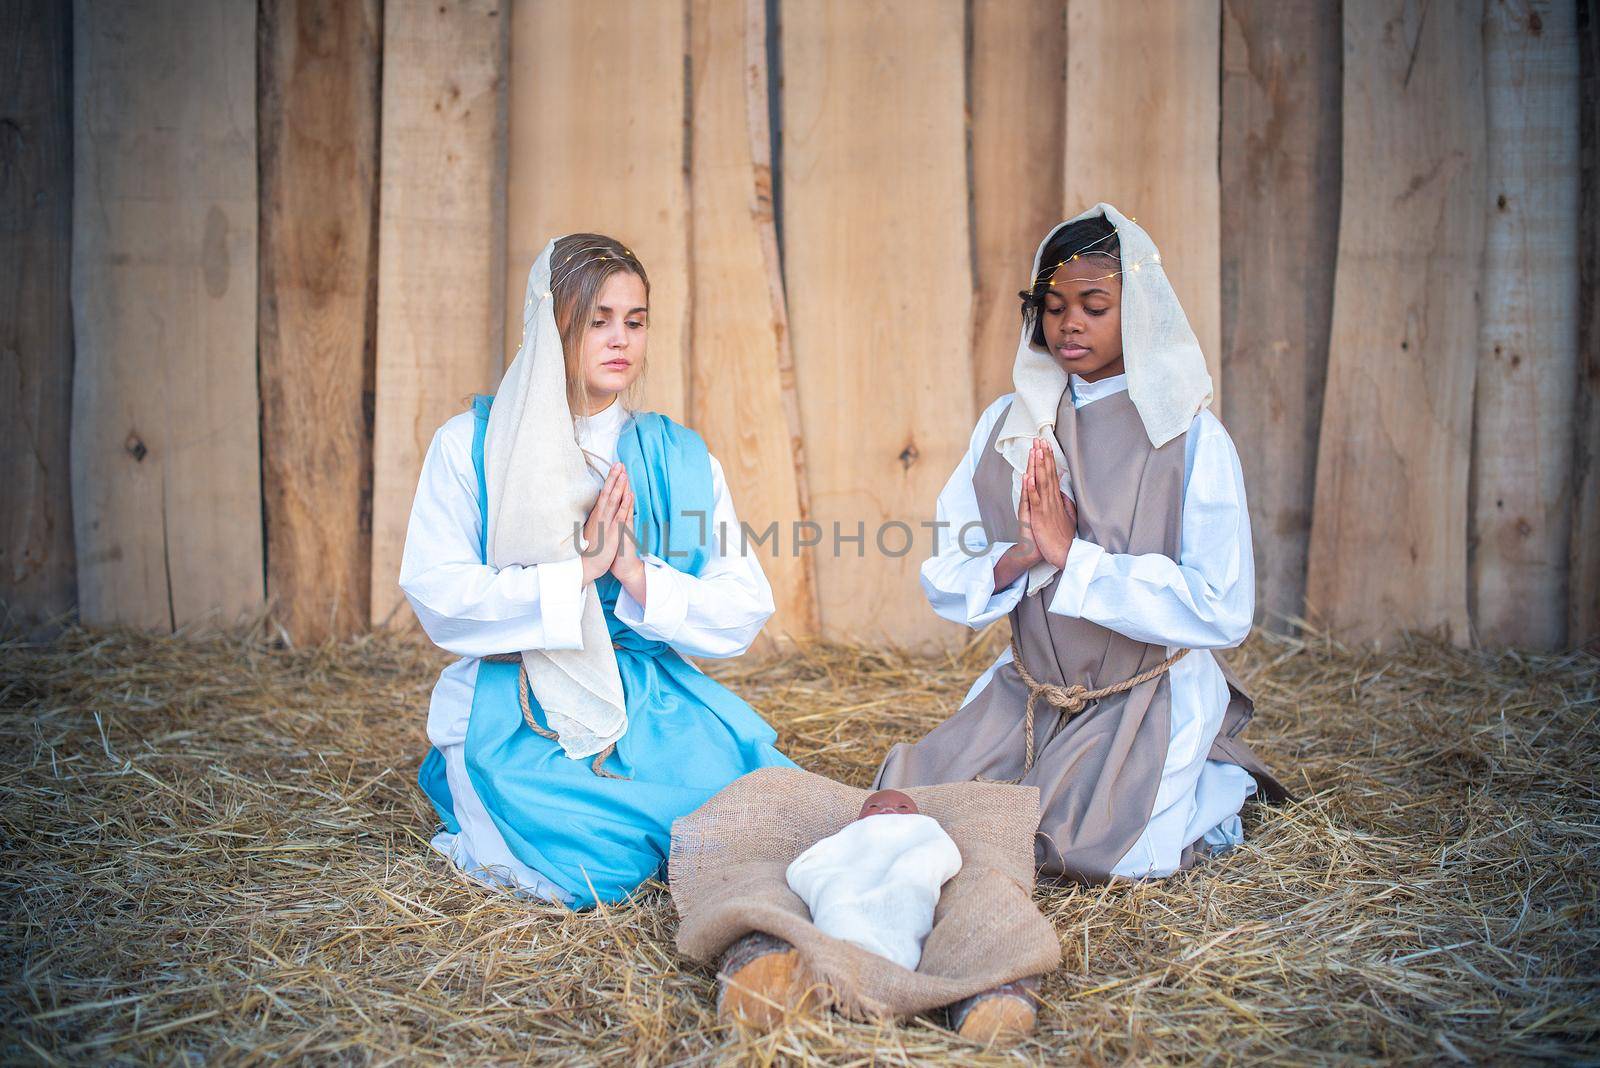 Lgtb nativity with two virgin marys praying next to a black representation of Jesus baby in a crib